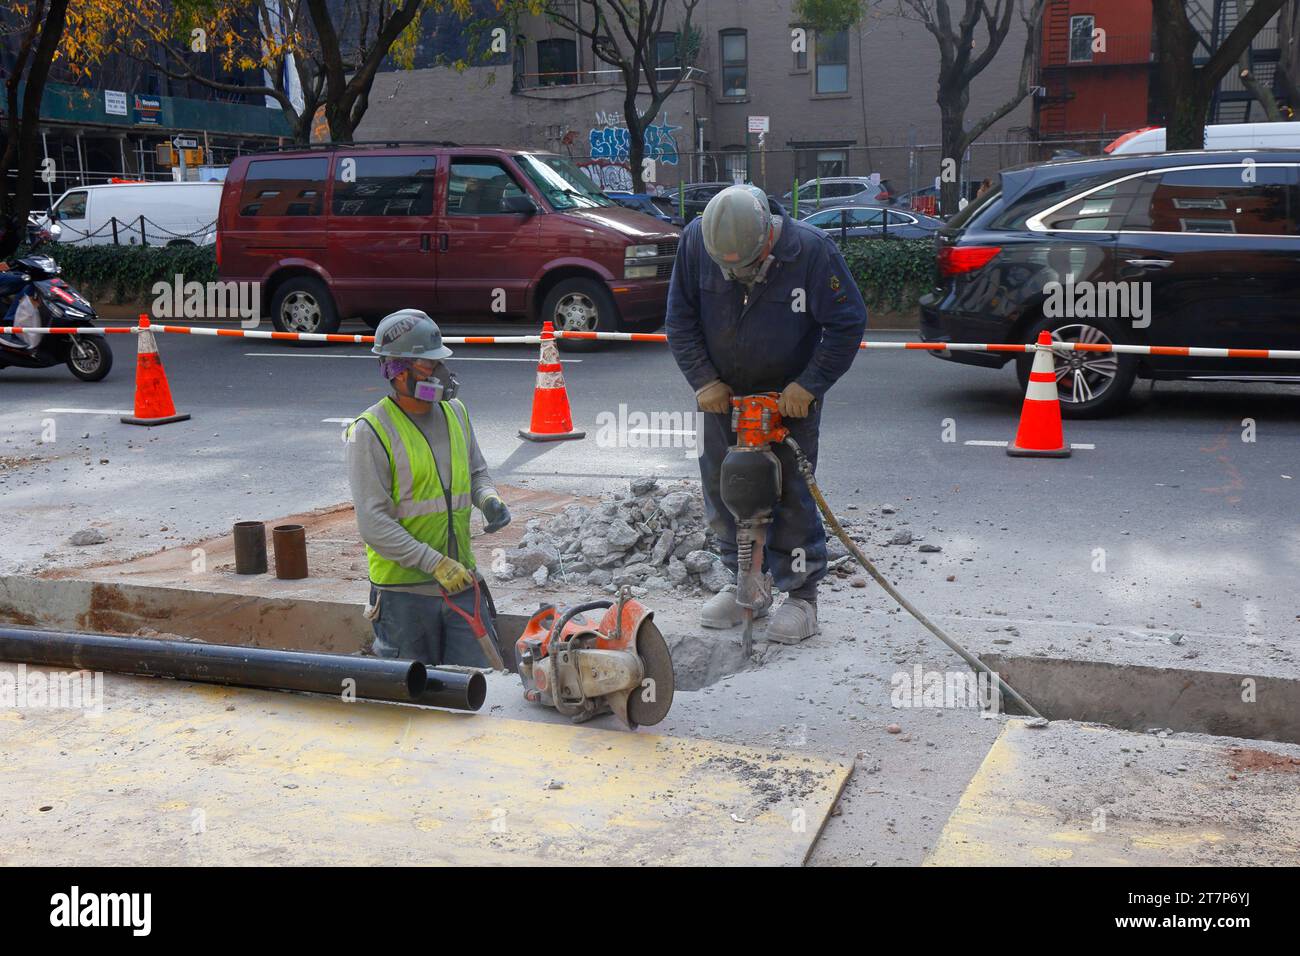 A construction crew with a pneumatic jackhammer breaks up concrete for a road repair with car traffic in the background. Stock Photo